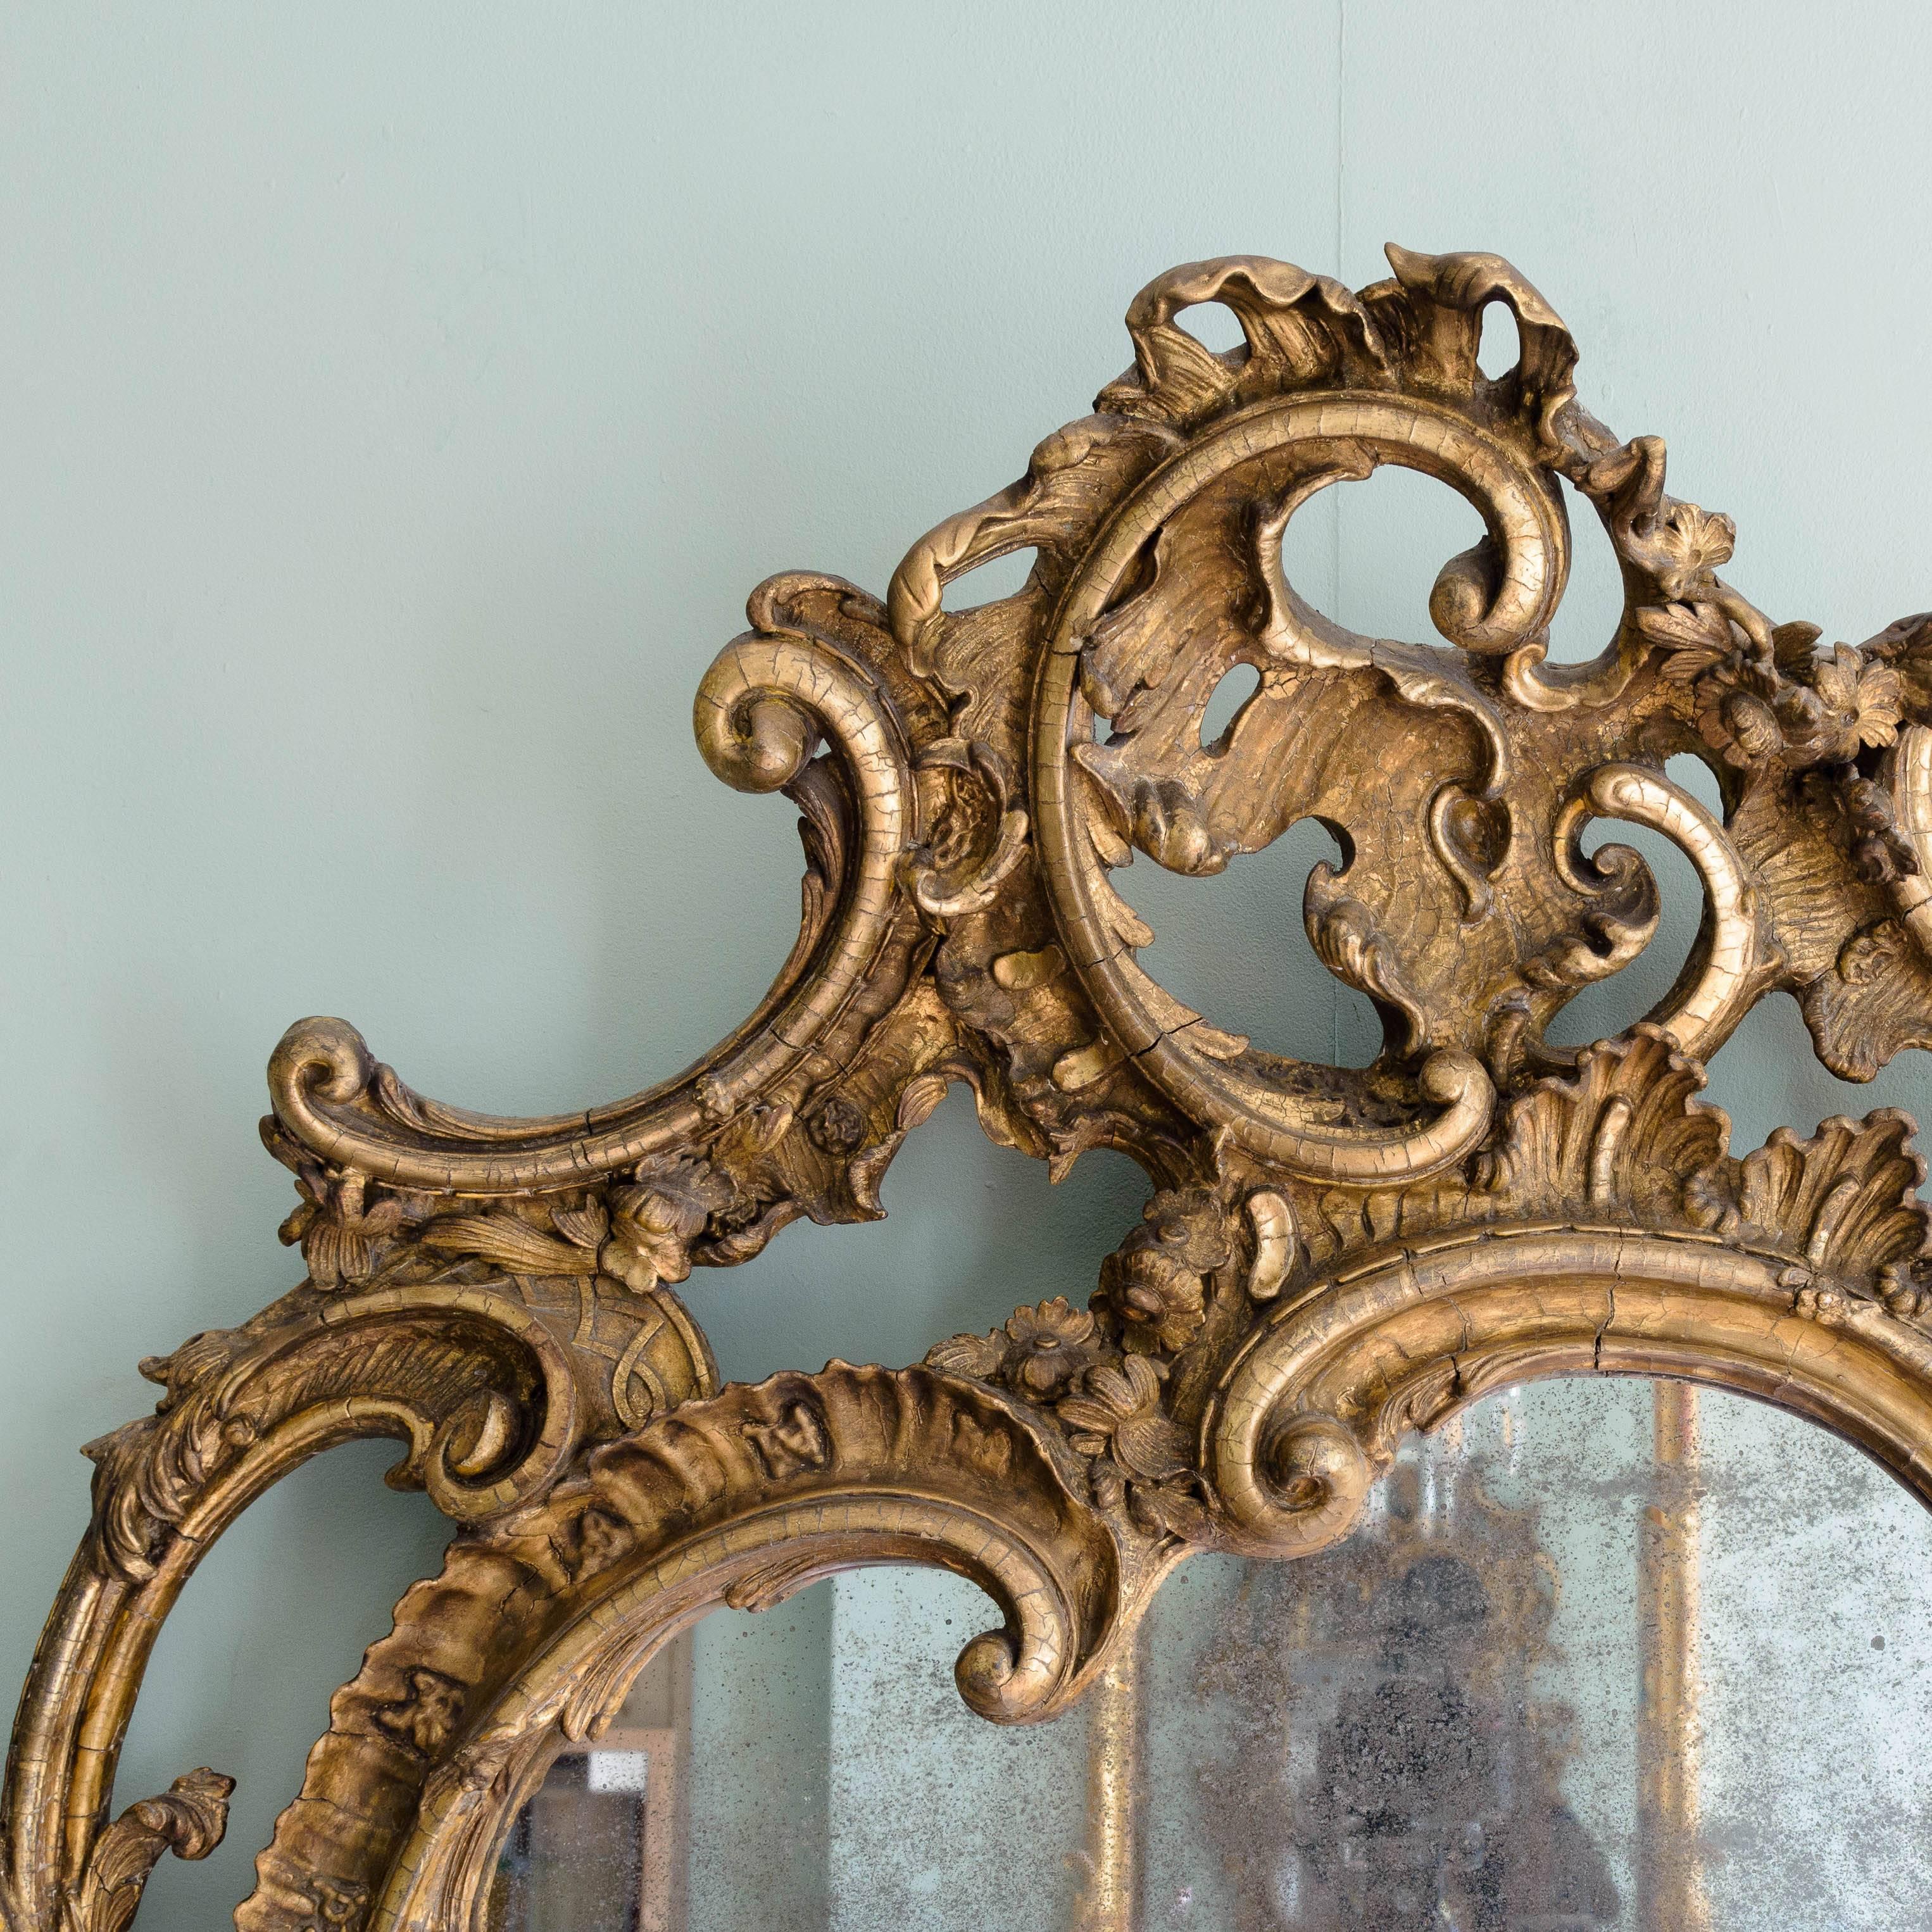 Large 19th century Rococo Revival wall mirror, the well-foxed asymmetric plate surrounded by c-scrolls, the gilded frame comprised of further c and s scrolls, acanthus flourishes and floral motifs.

In fantastic antique condition with both the